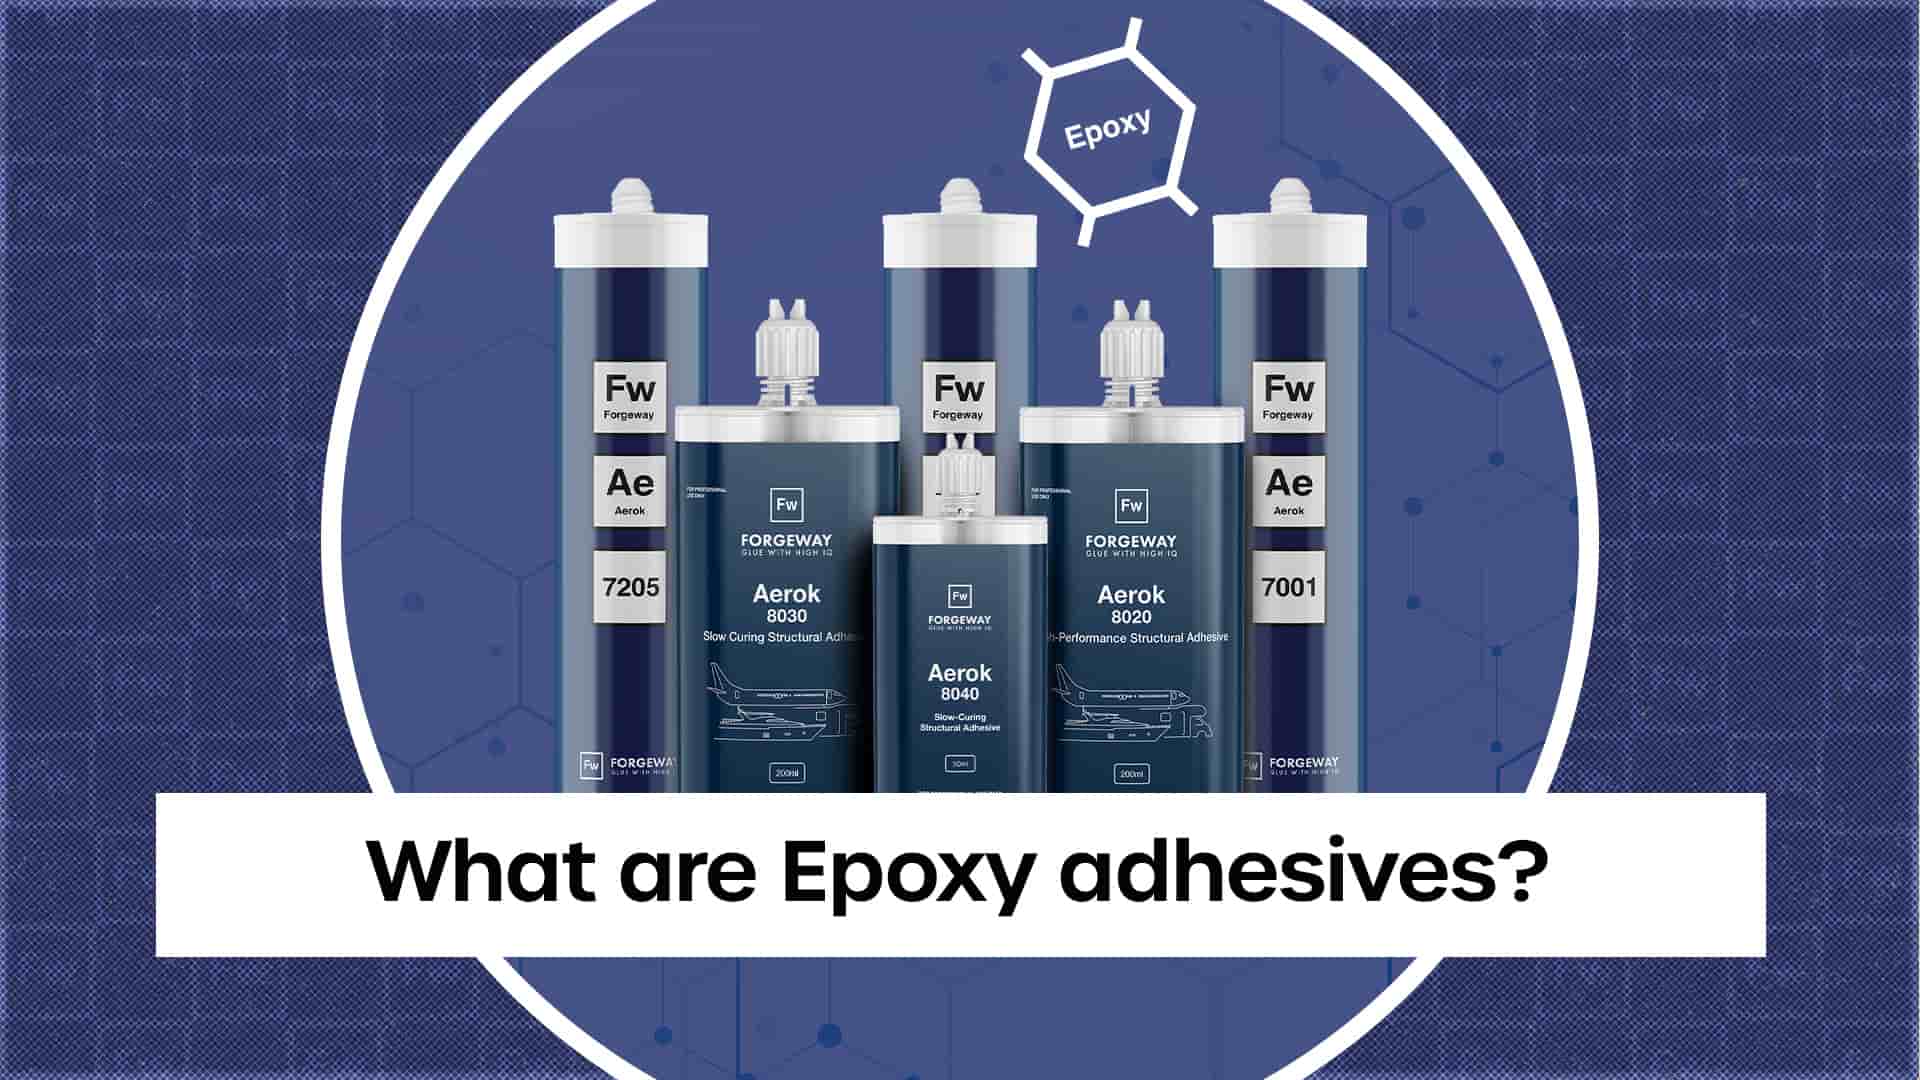 What are epoxy adhesives?